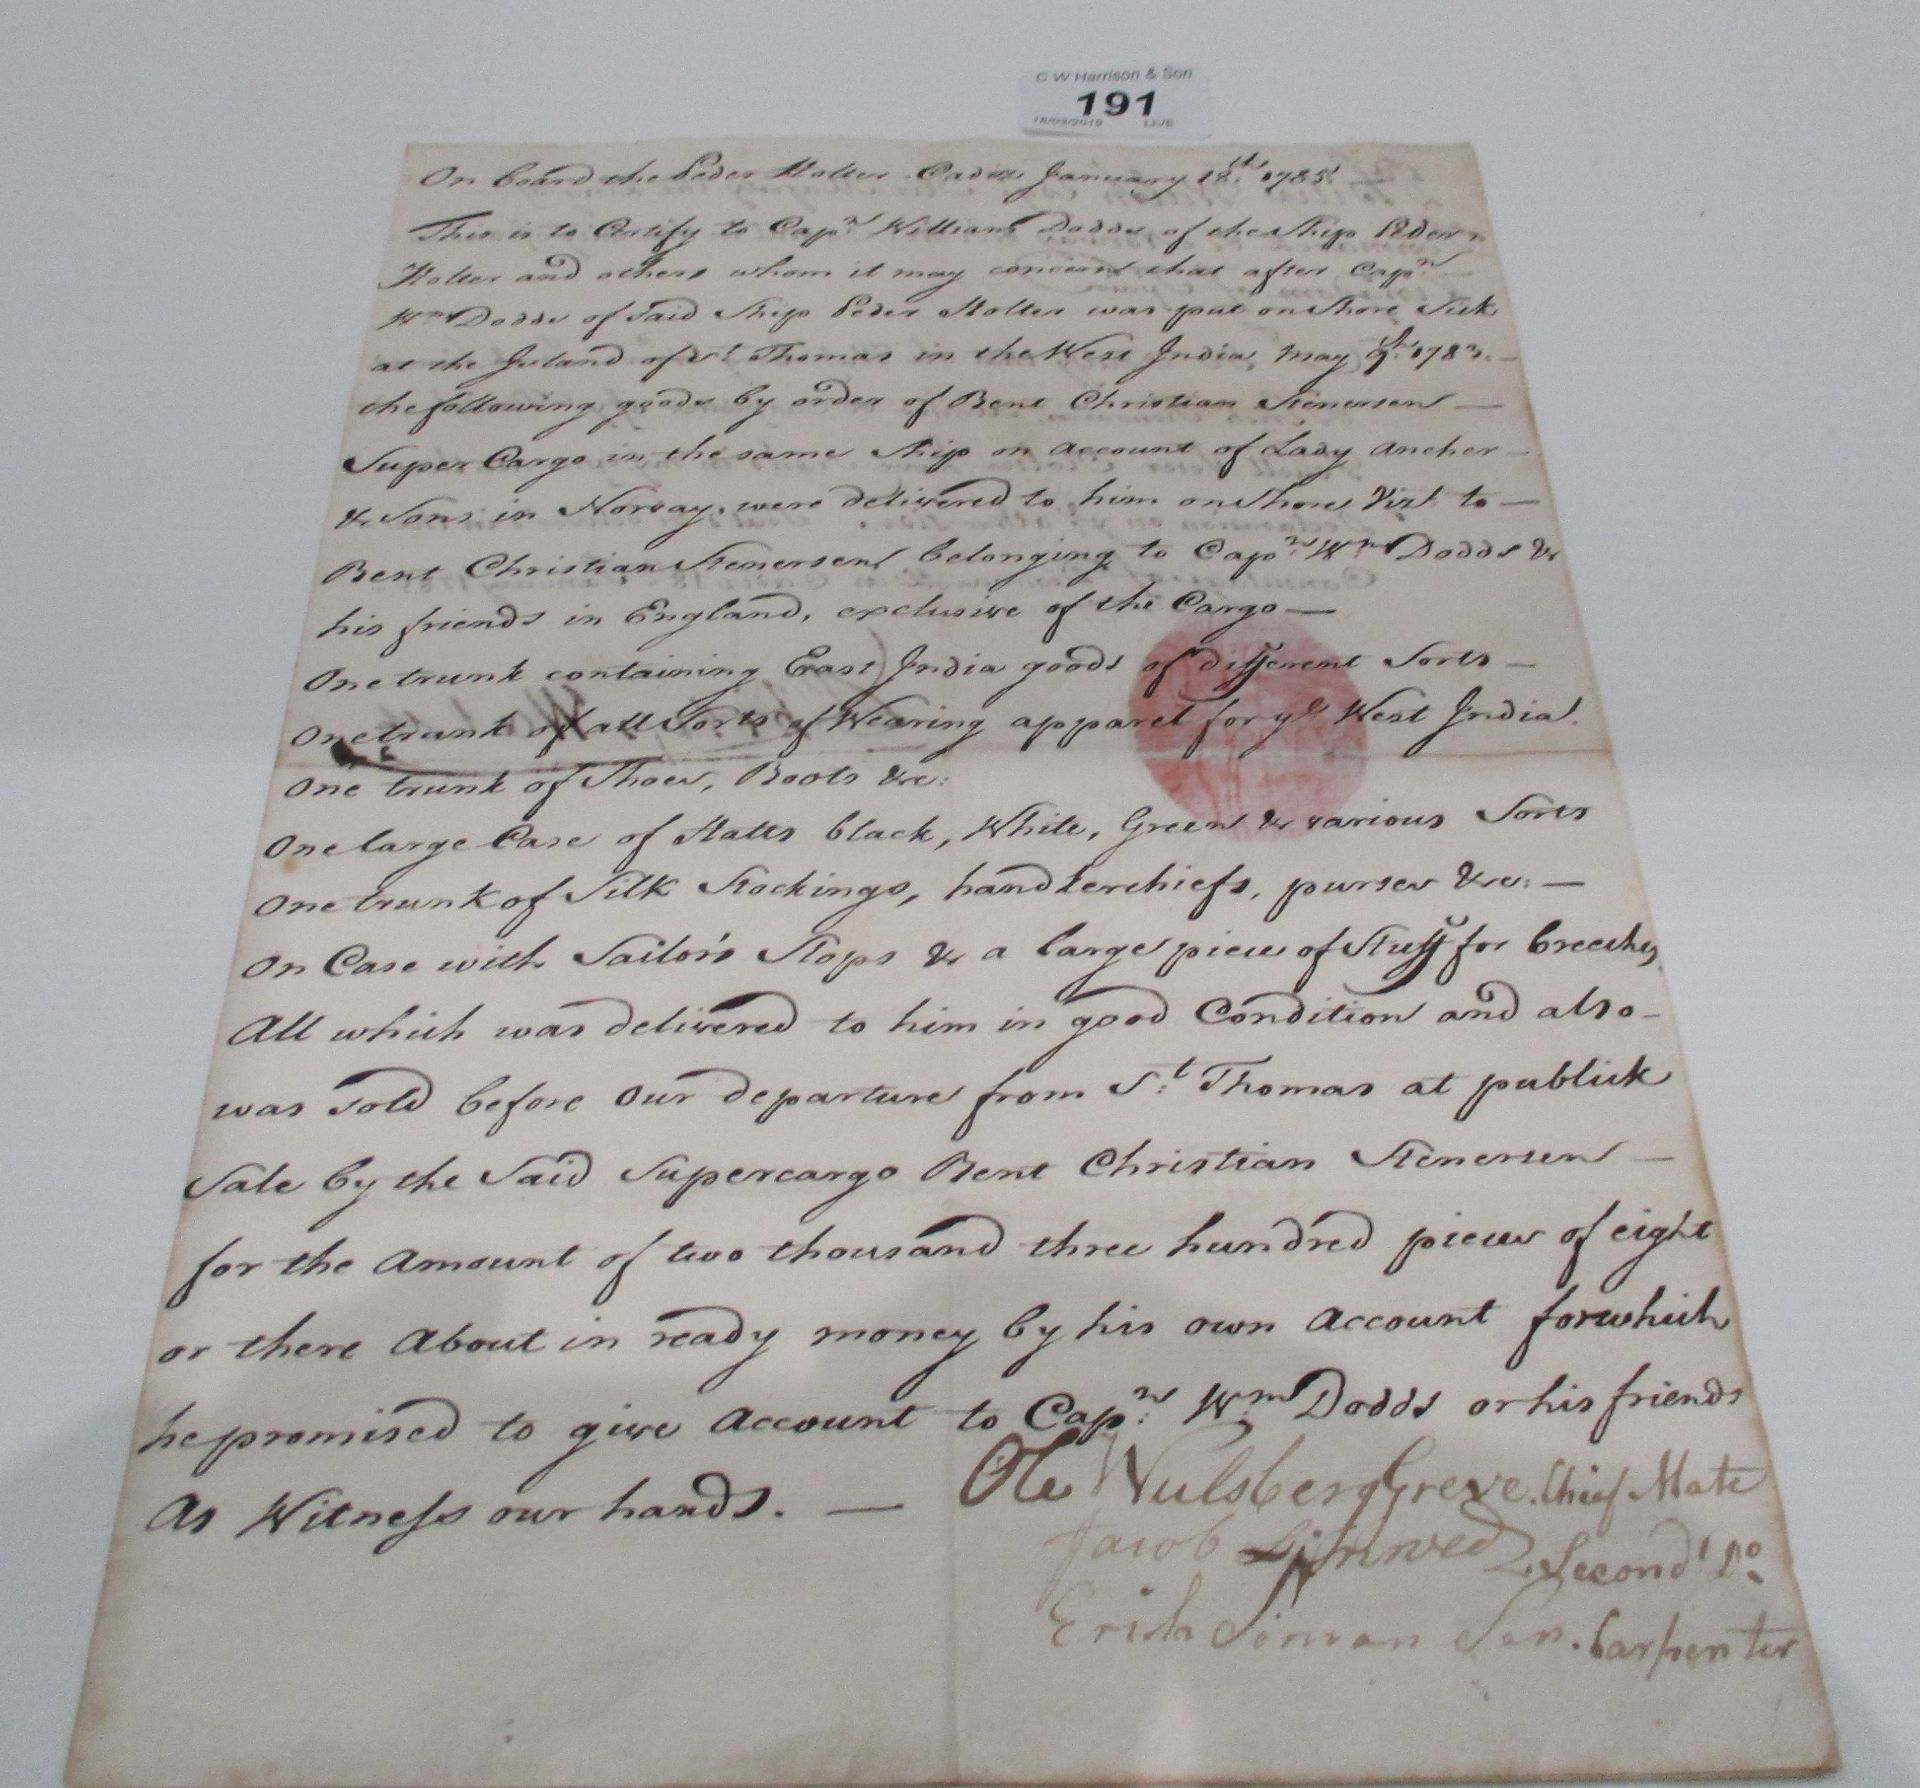 An interesting and intriguing Affidavit written aboard ship in 1785 concerning the affairs of it's